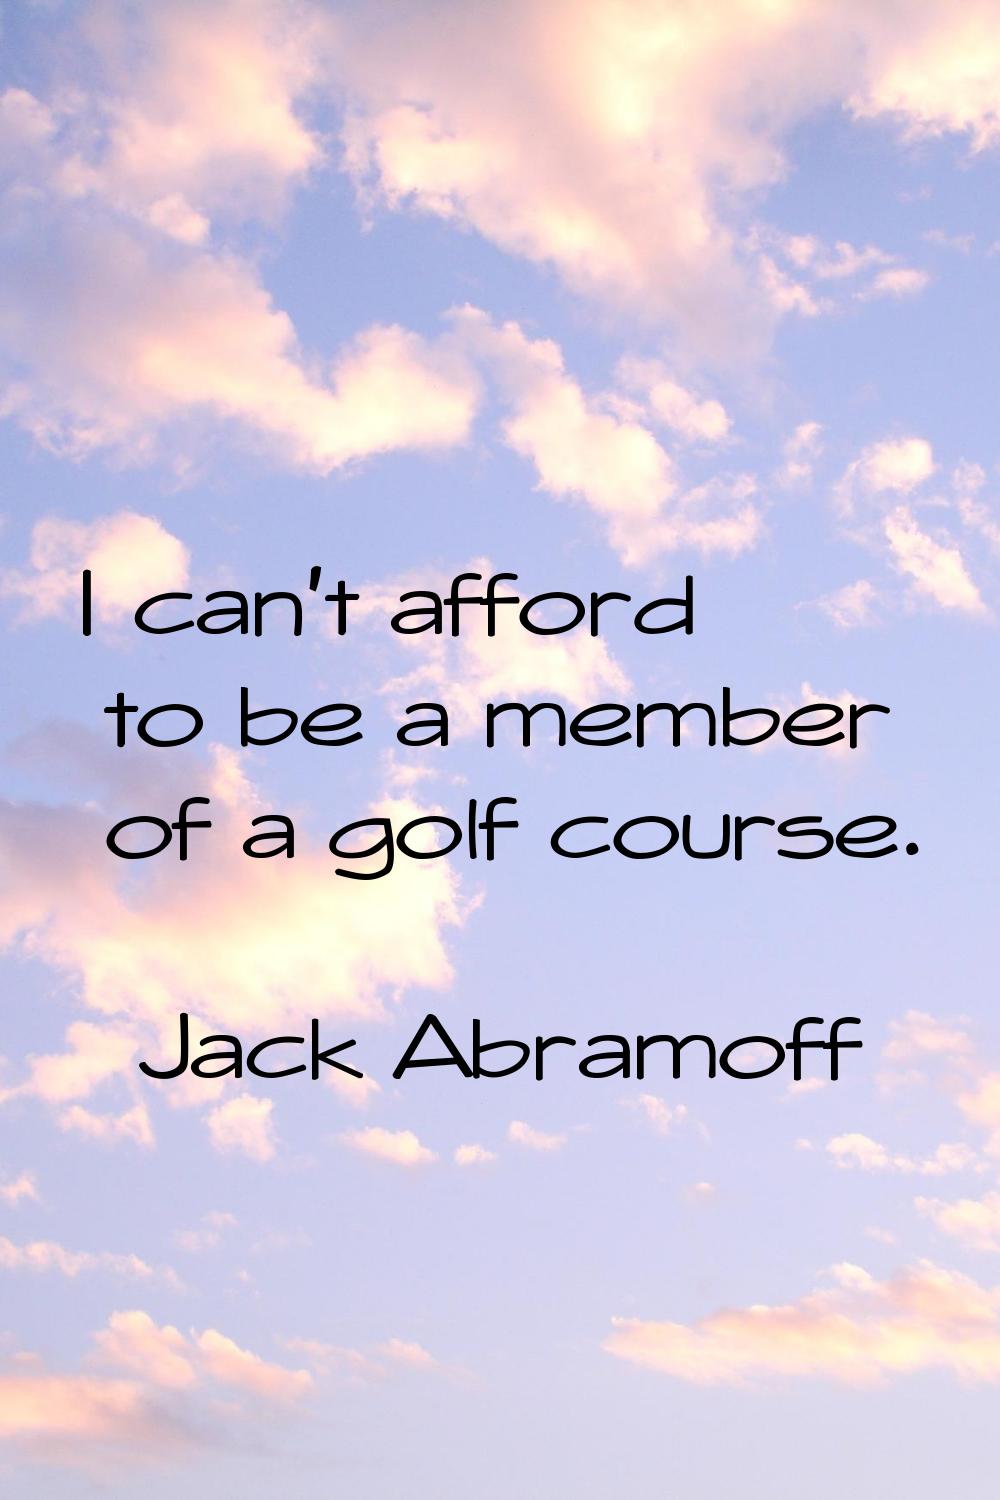 I can't afford to be a member of a golf course.